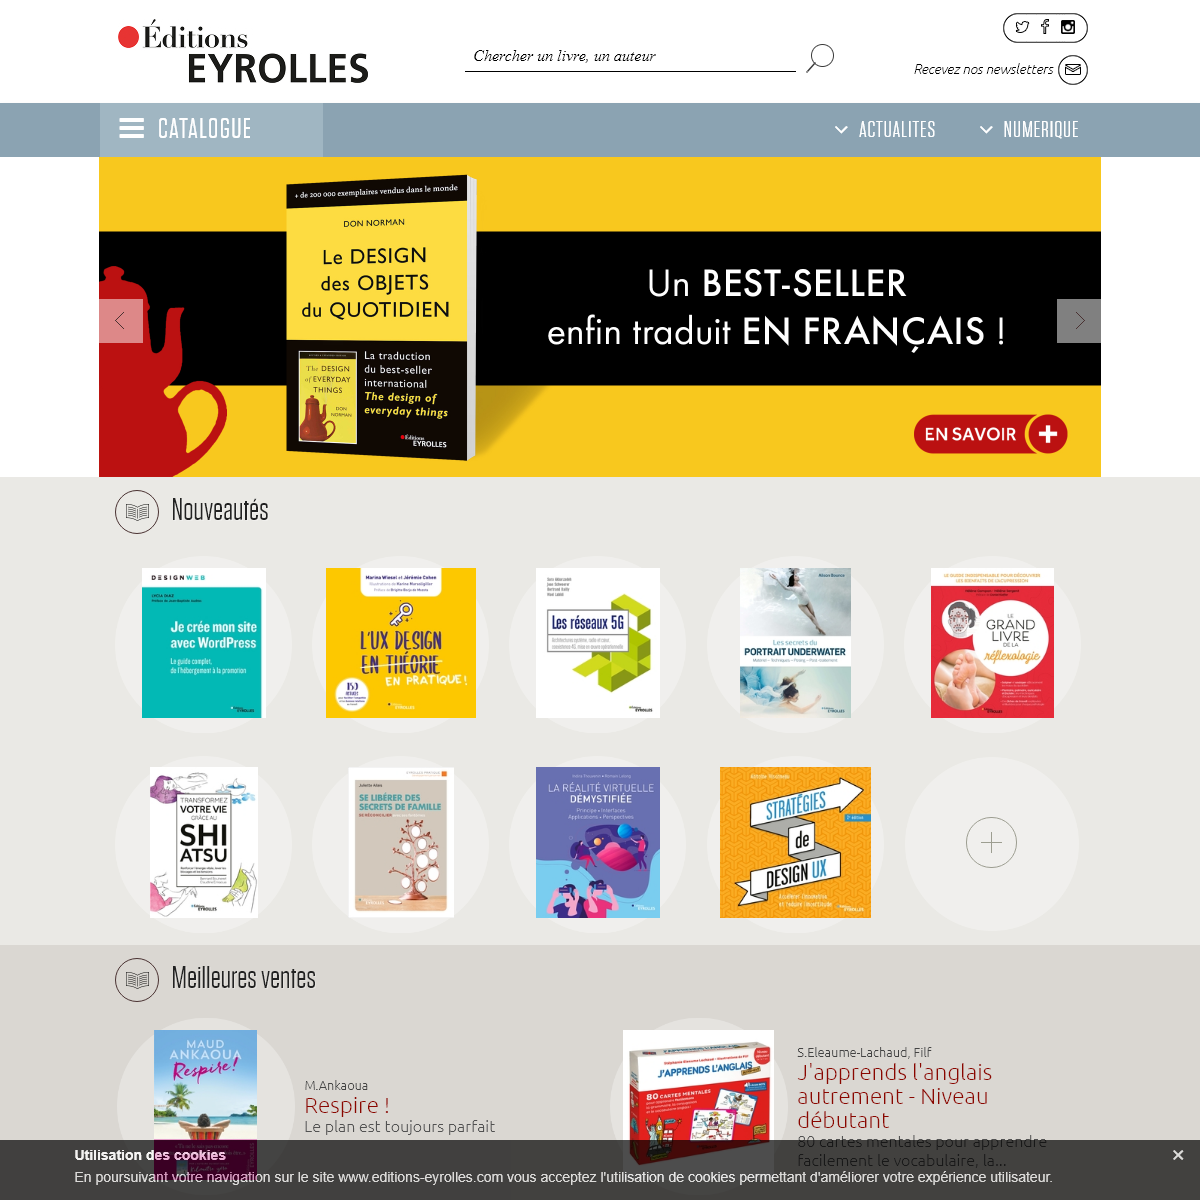 A complete backup of editions-eyrolles.com